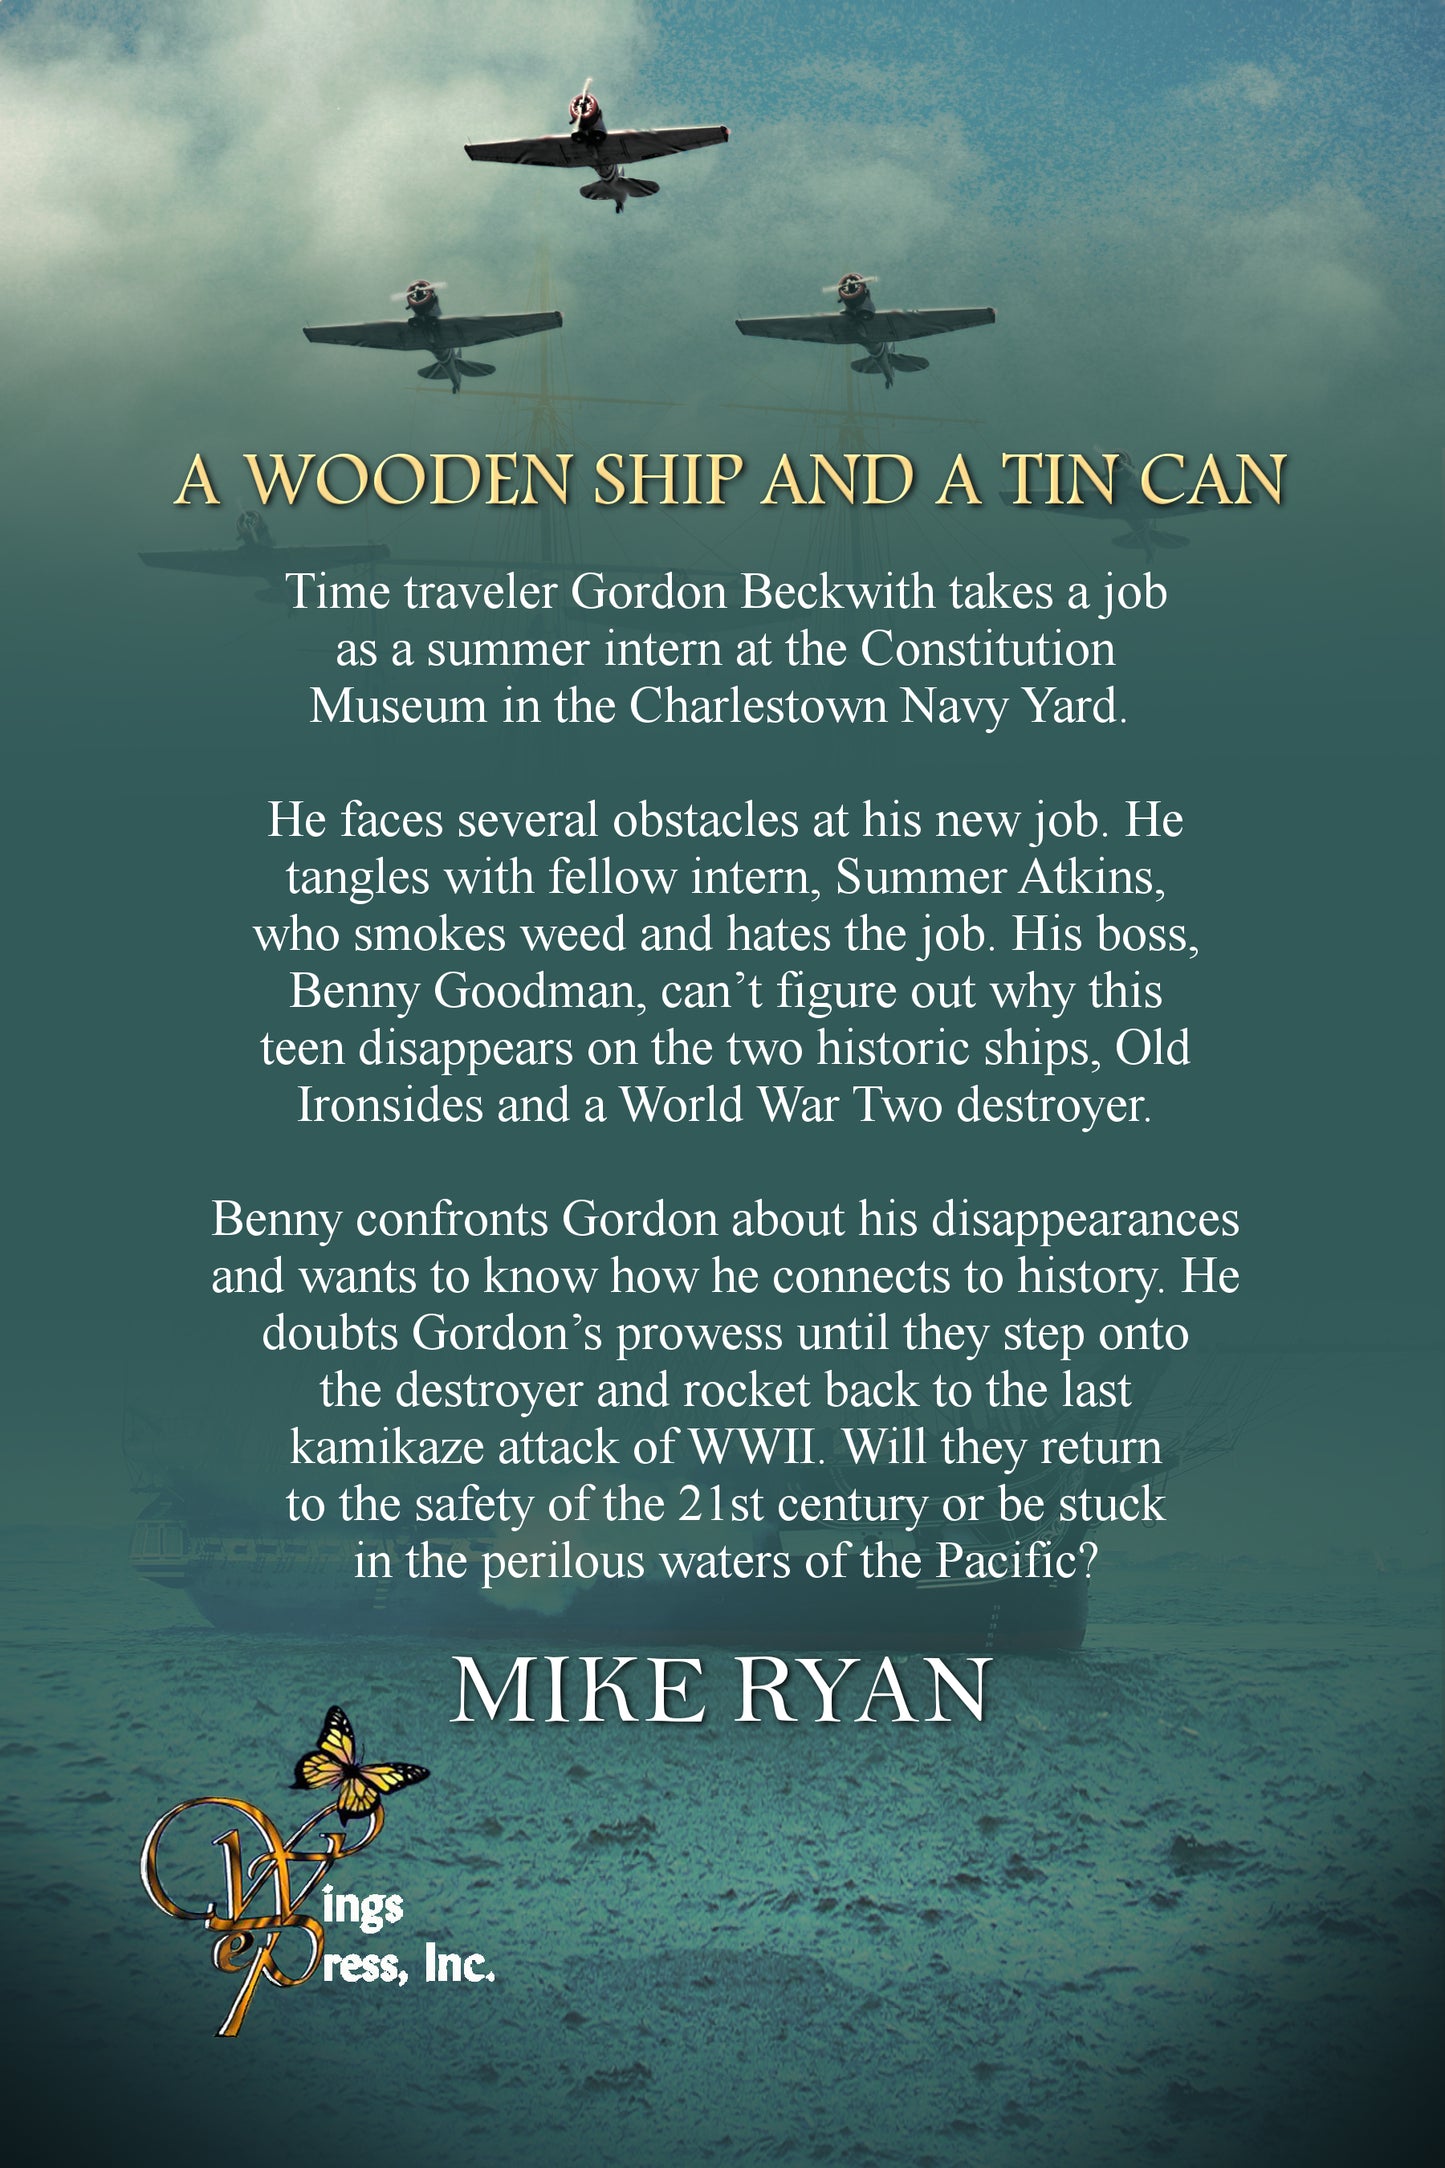 A Wooden Ship and a Tin Can